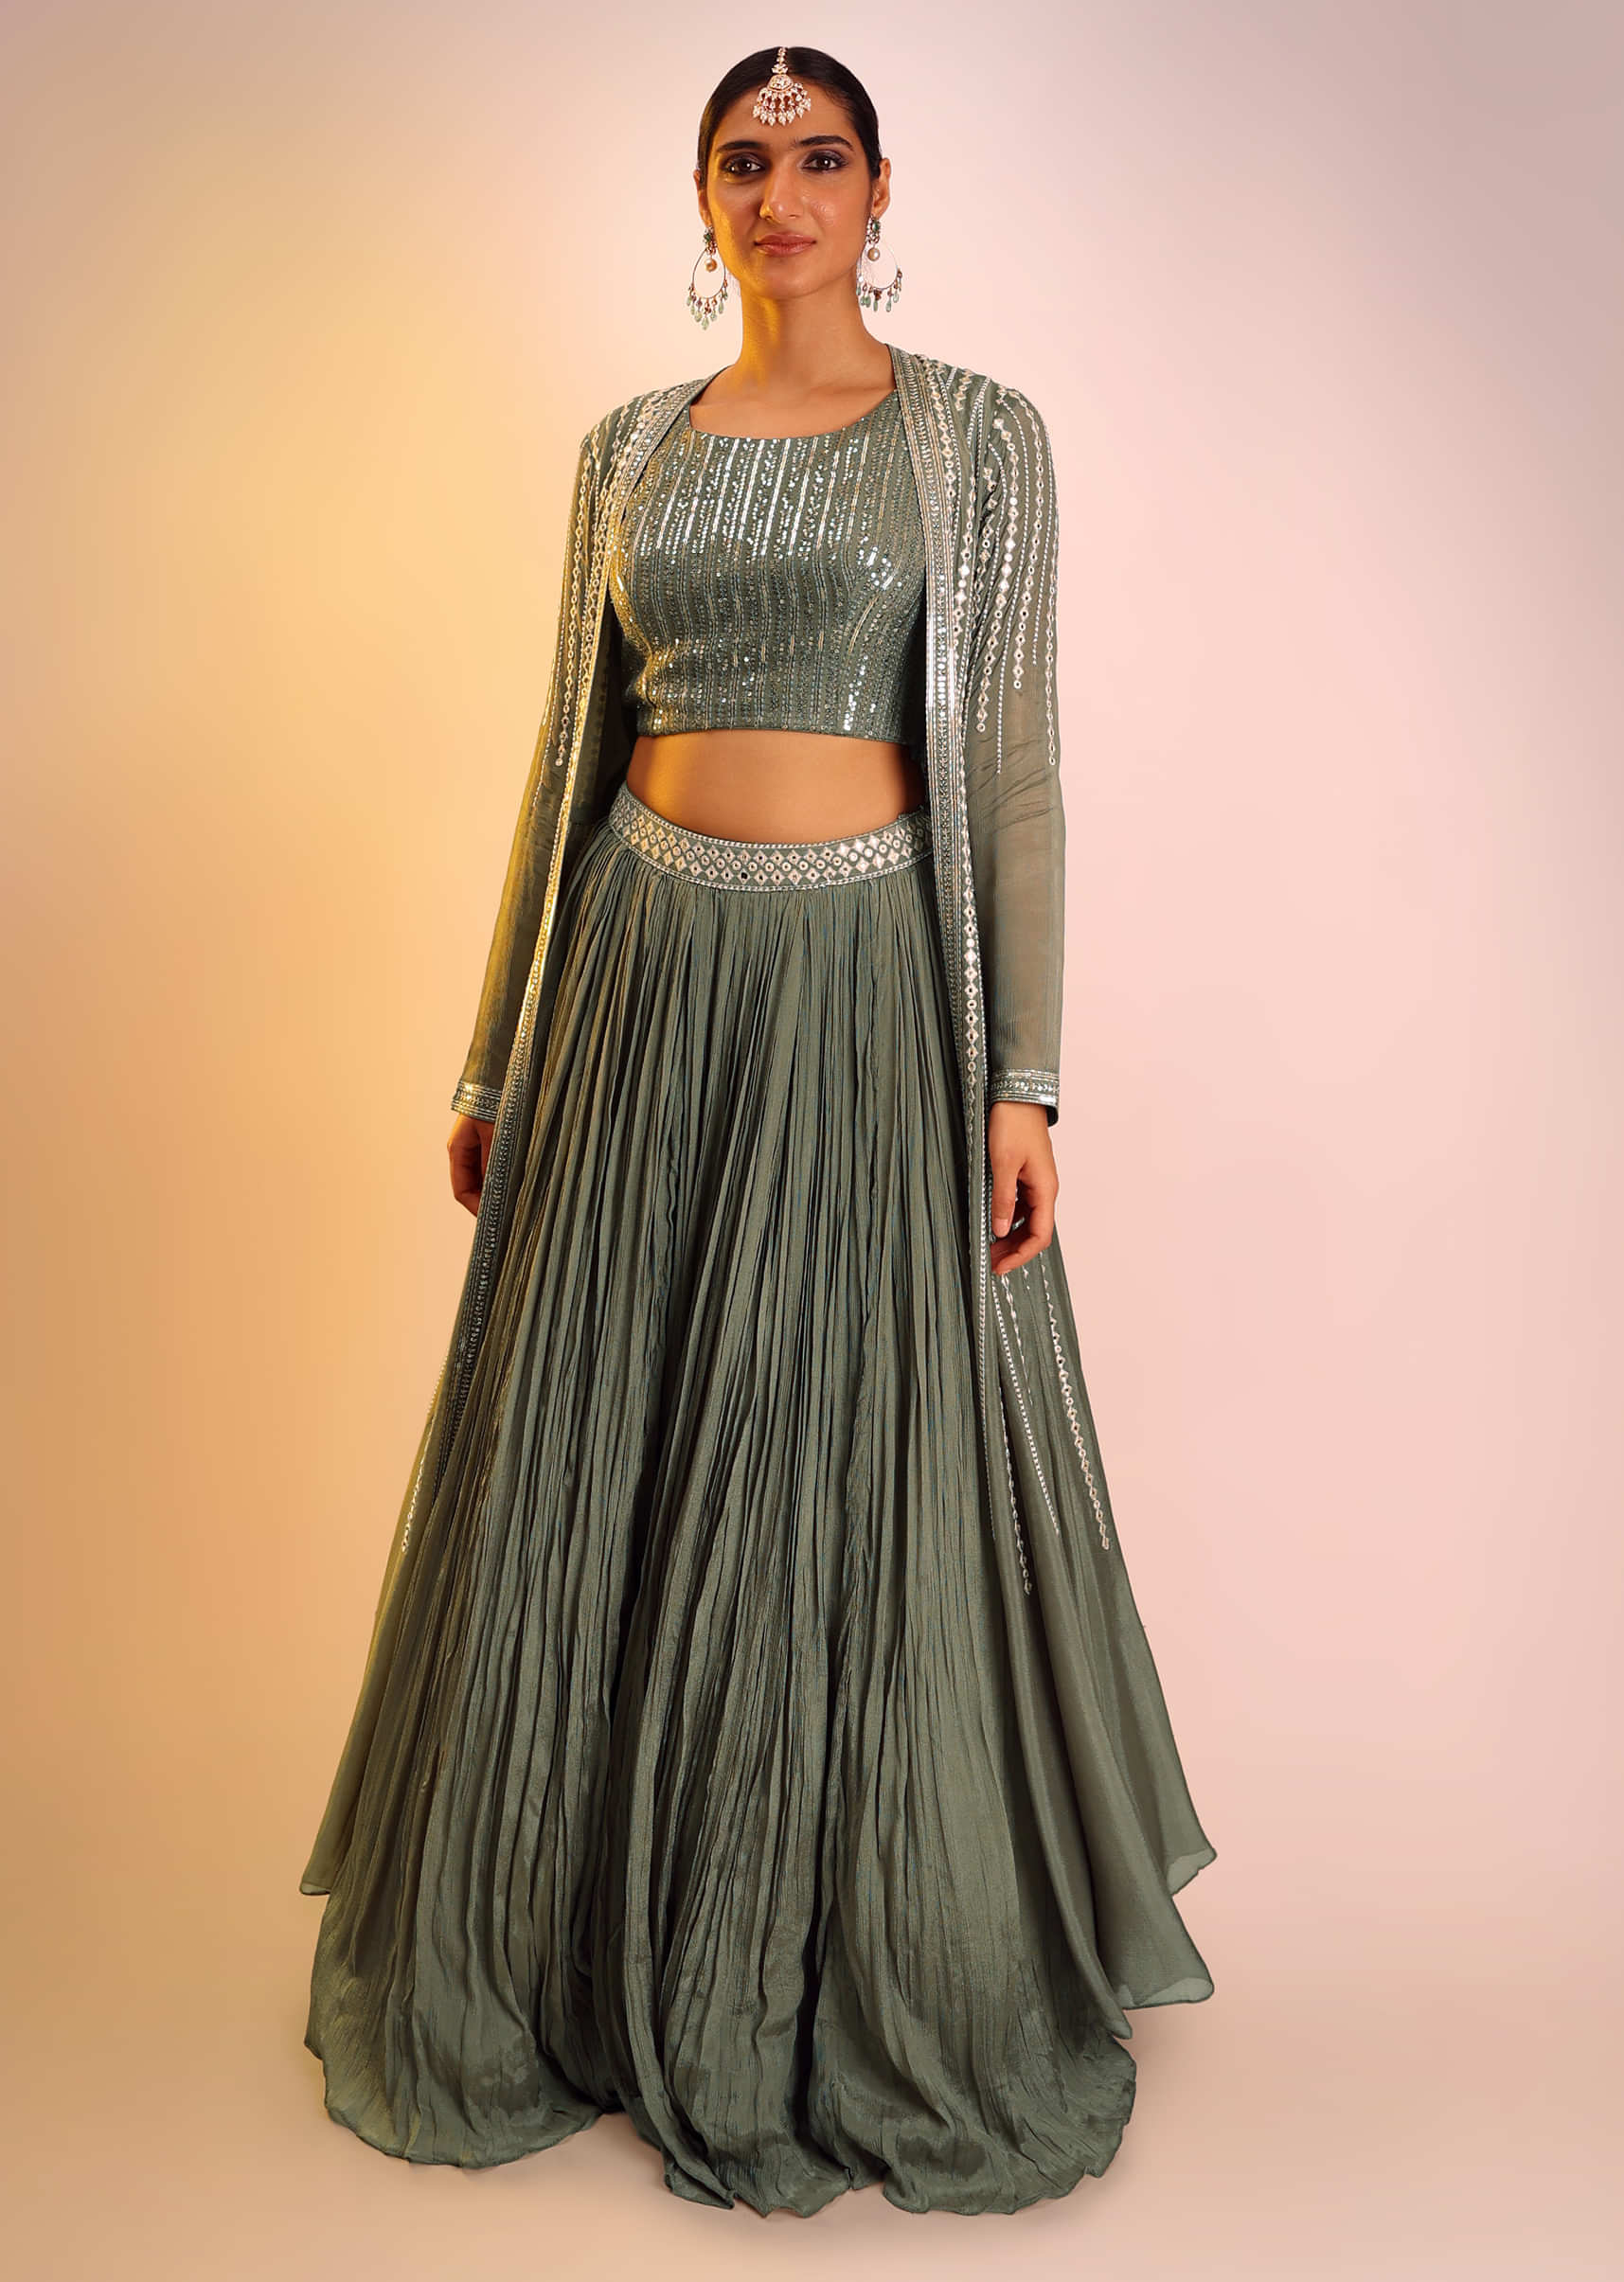 Olive Green Lehenga, Crop Top And Jacket Set With Mirror Abla Embroidery Detailing